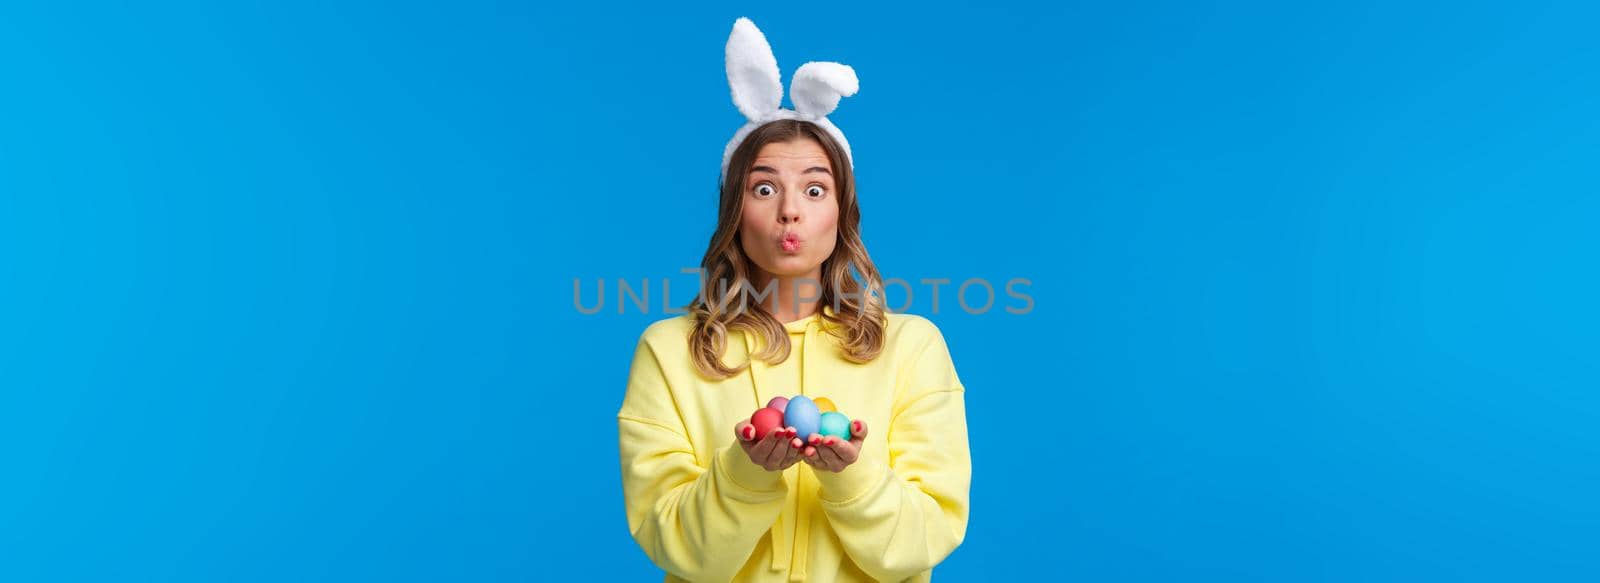 Holidays, traditions and celebration concept. Silly cute caucasian blond girl present you Easter eggs, painted it for holiday, show mwah kiss expression and wear rabbit ears, blue background.